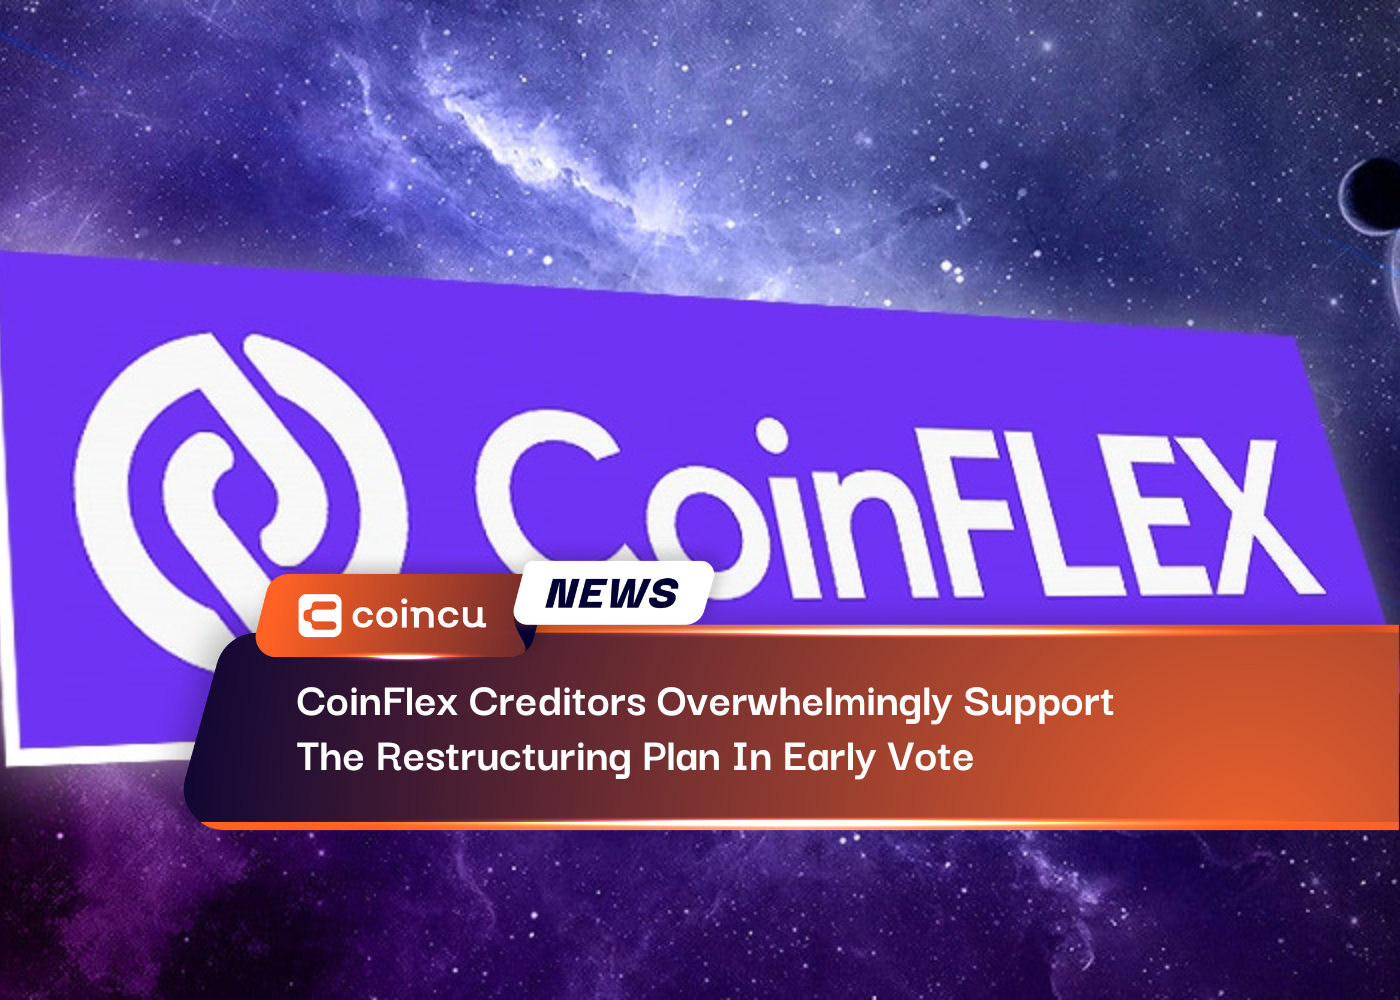 CoinFlex Creditors Overwhelmingly Support